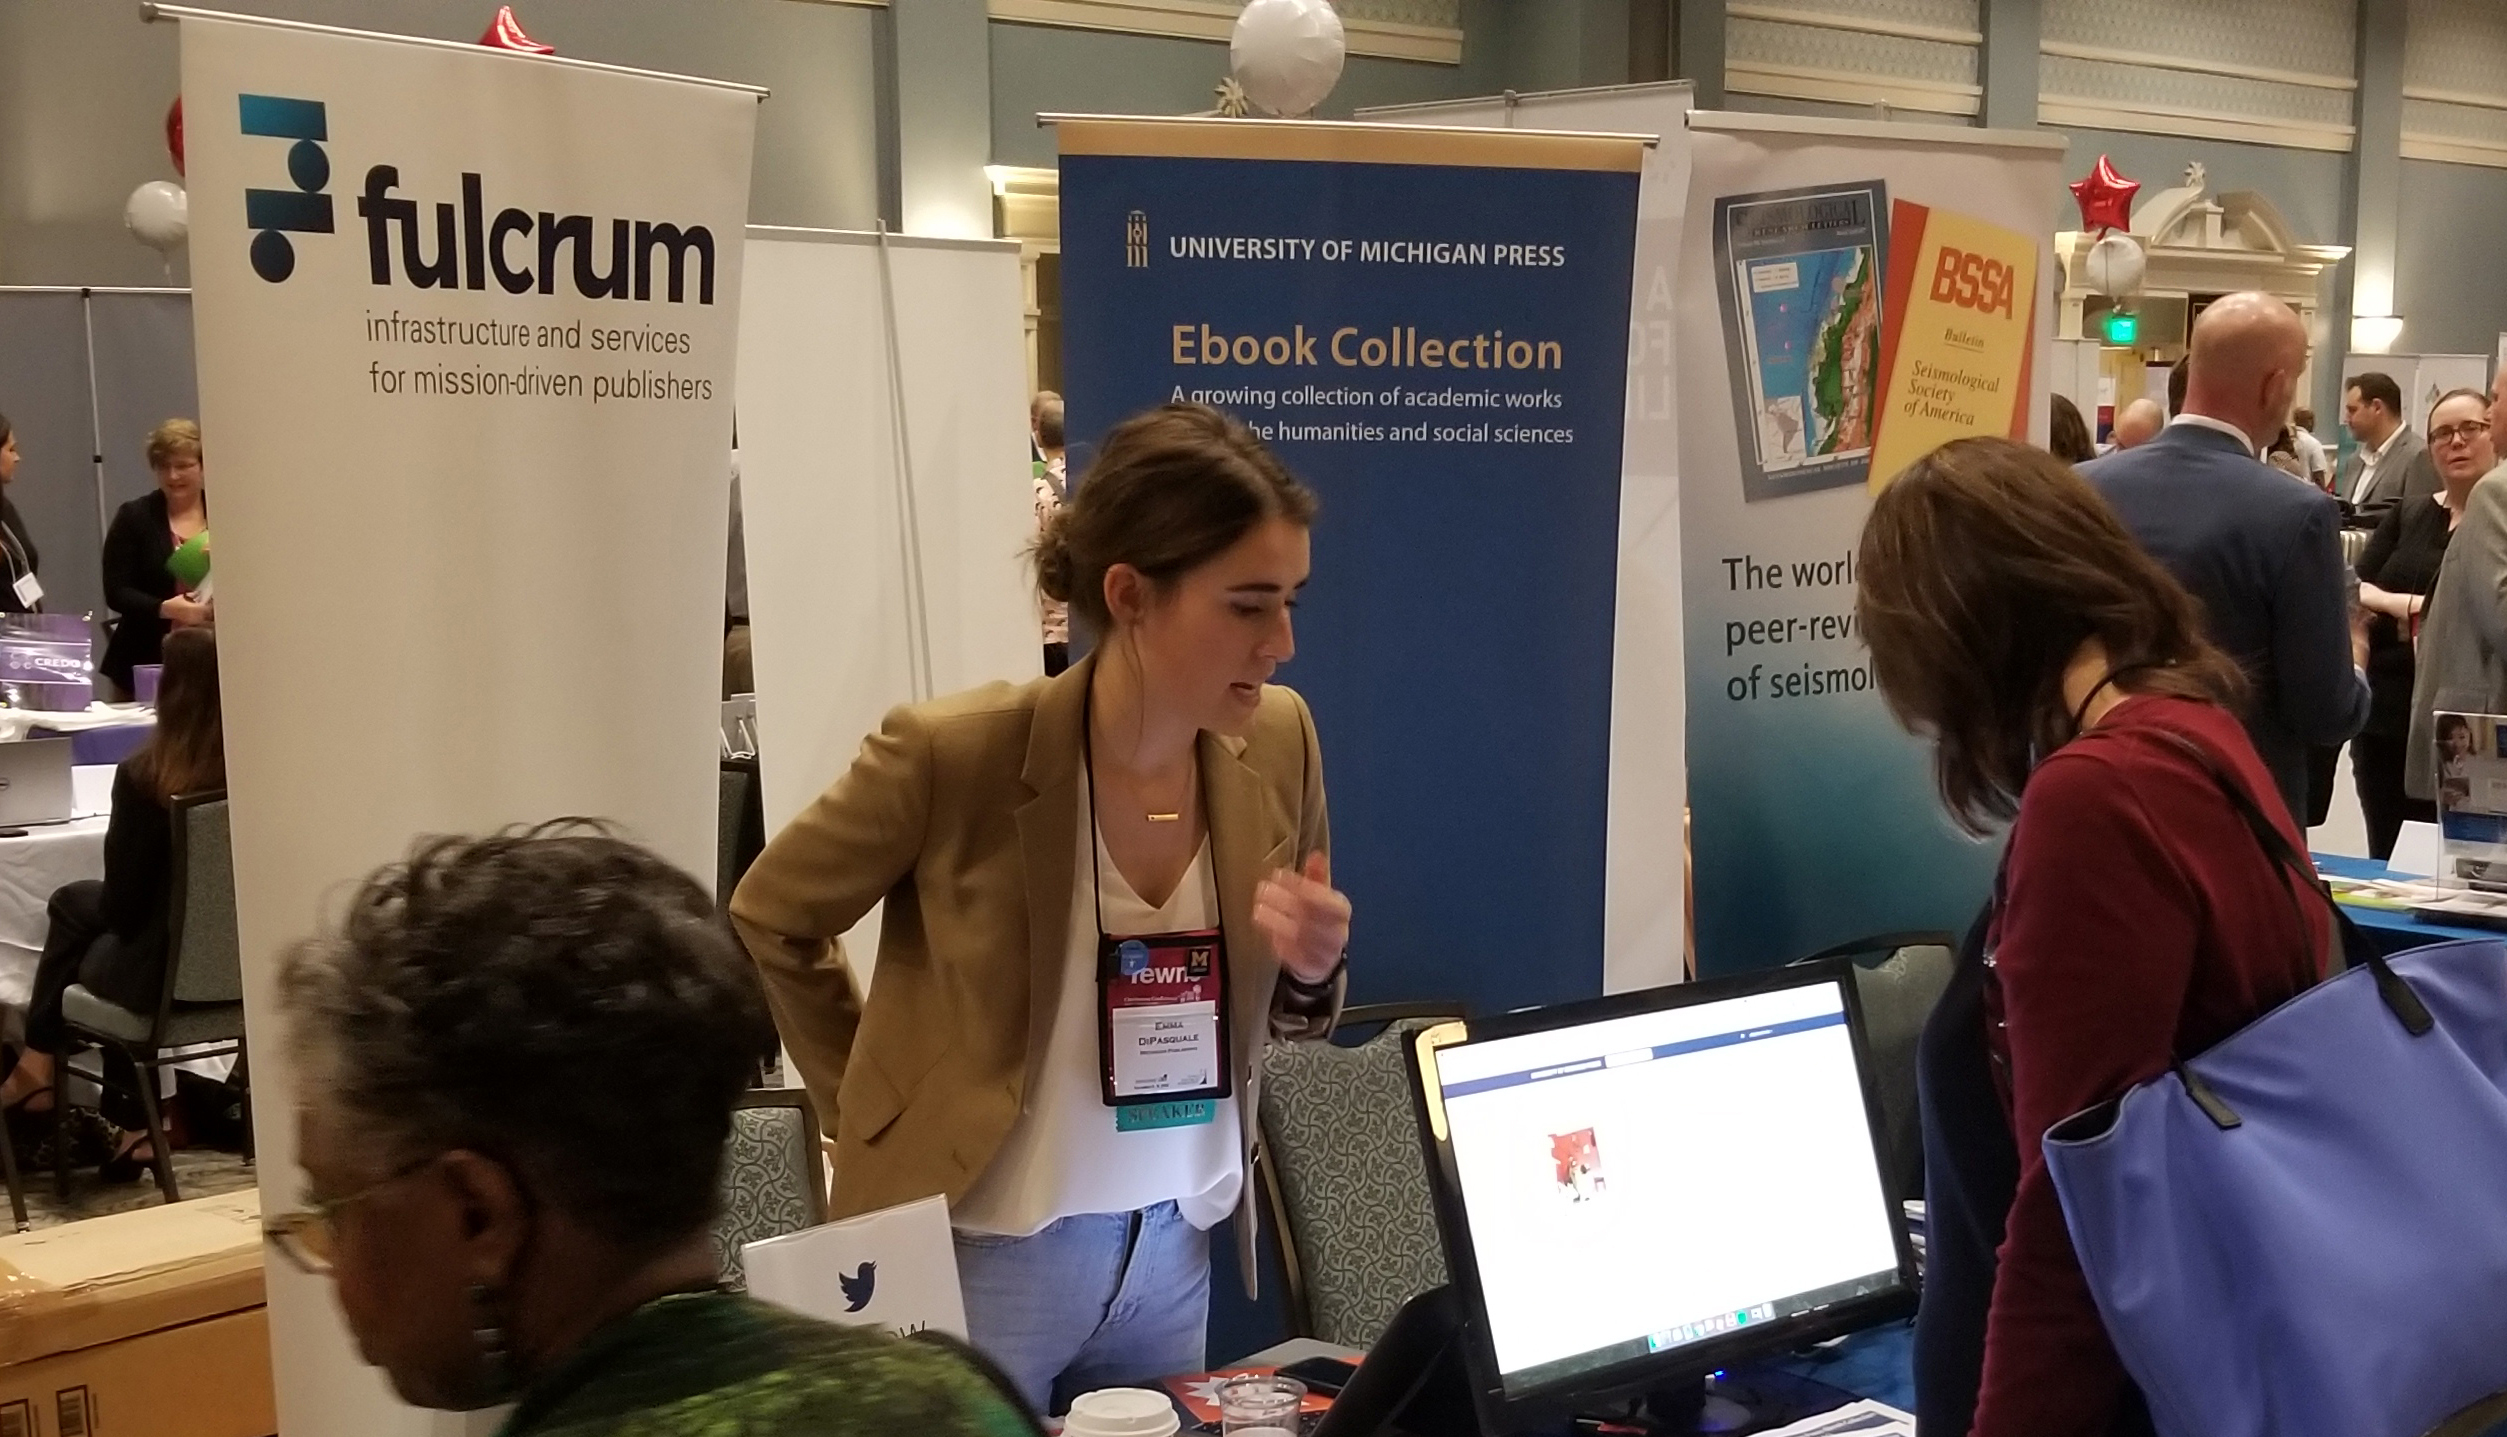 A photograph of a young woman showing a digital ebook from the University of Michigan Press Ebook collection to a Charleston conference attendee at the Michigan Publishing display booth. 